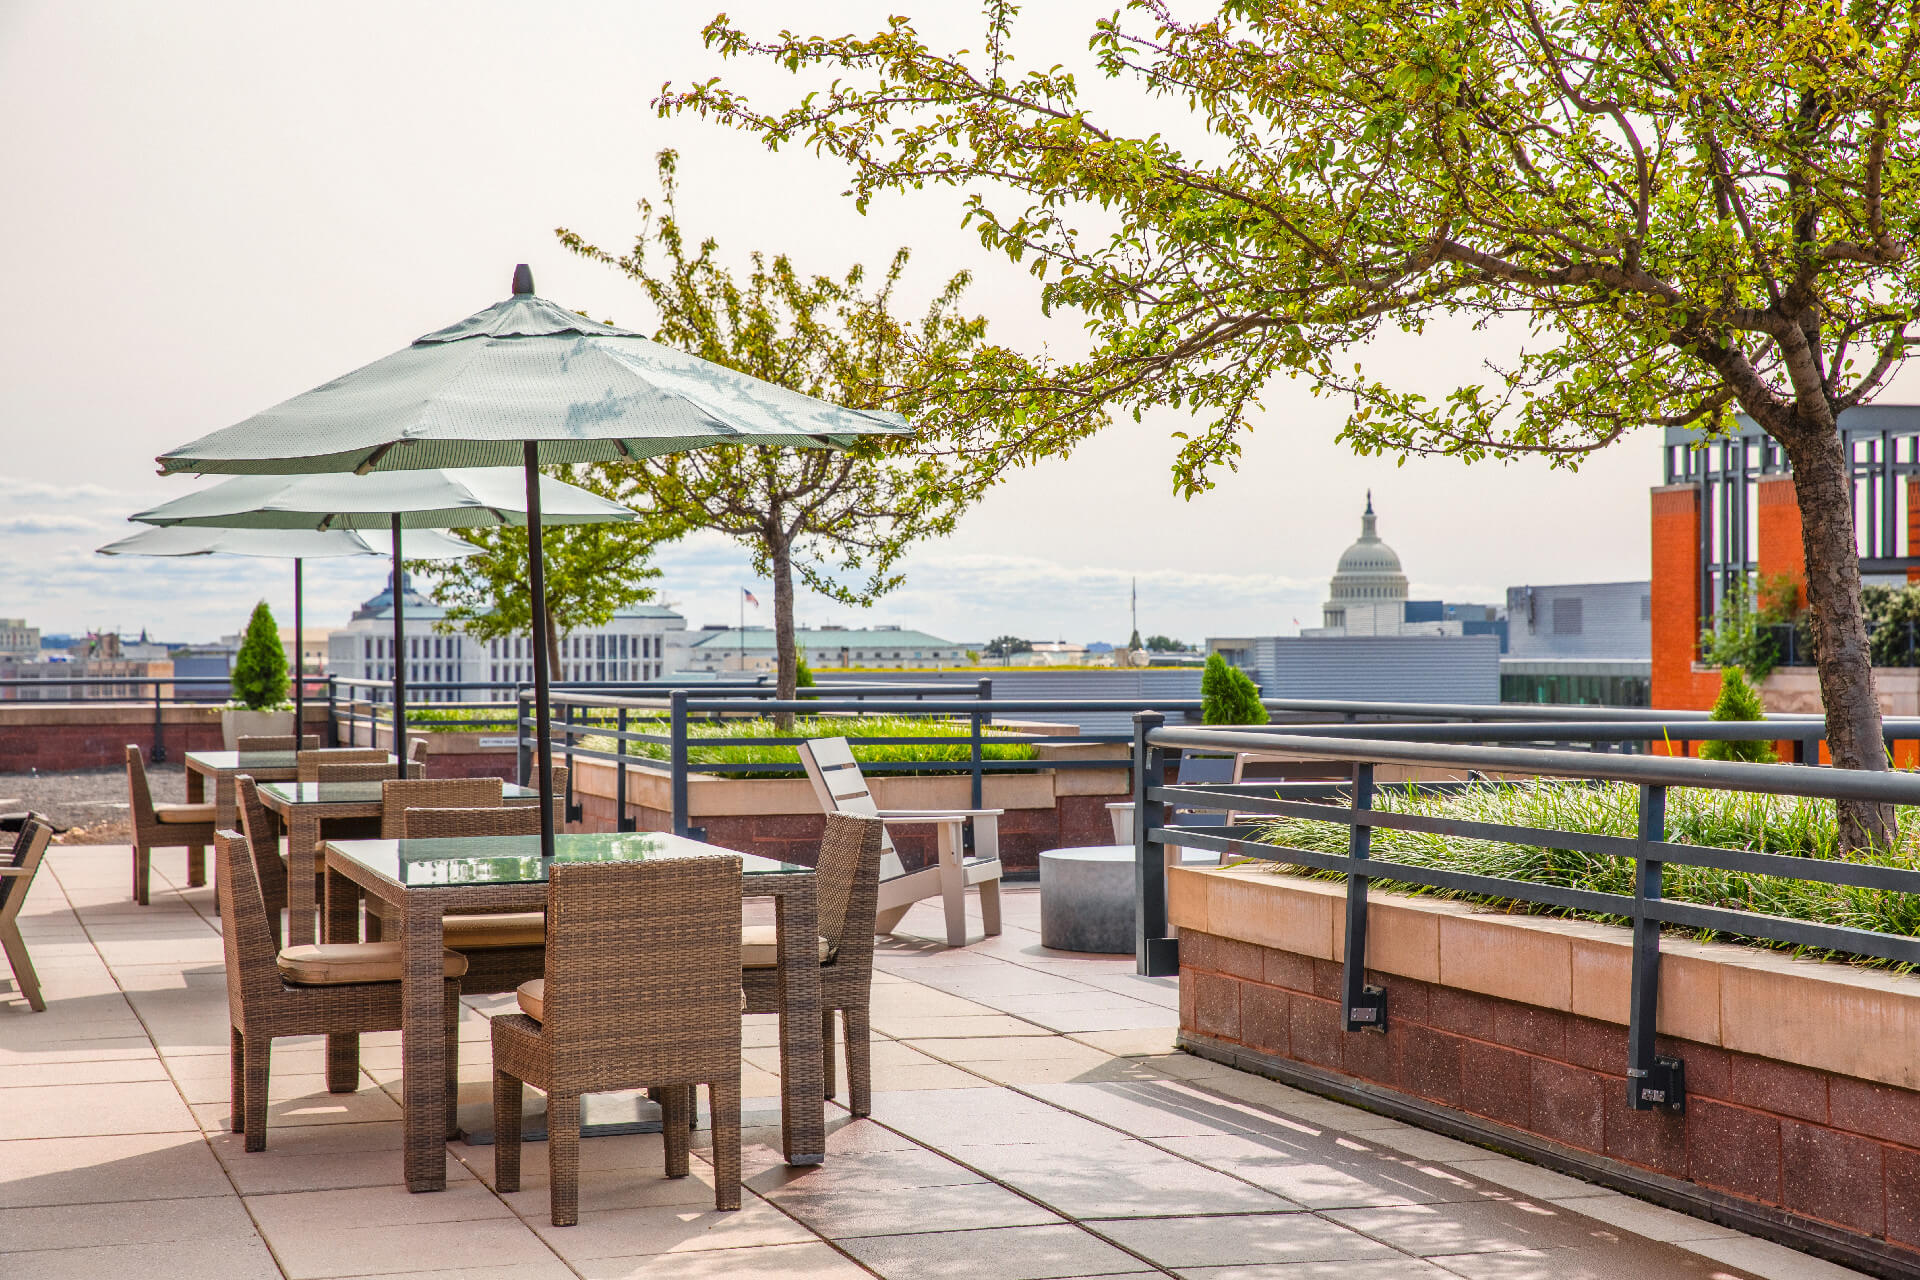 Senate Square : Enjoy the great views that our rooftop offers